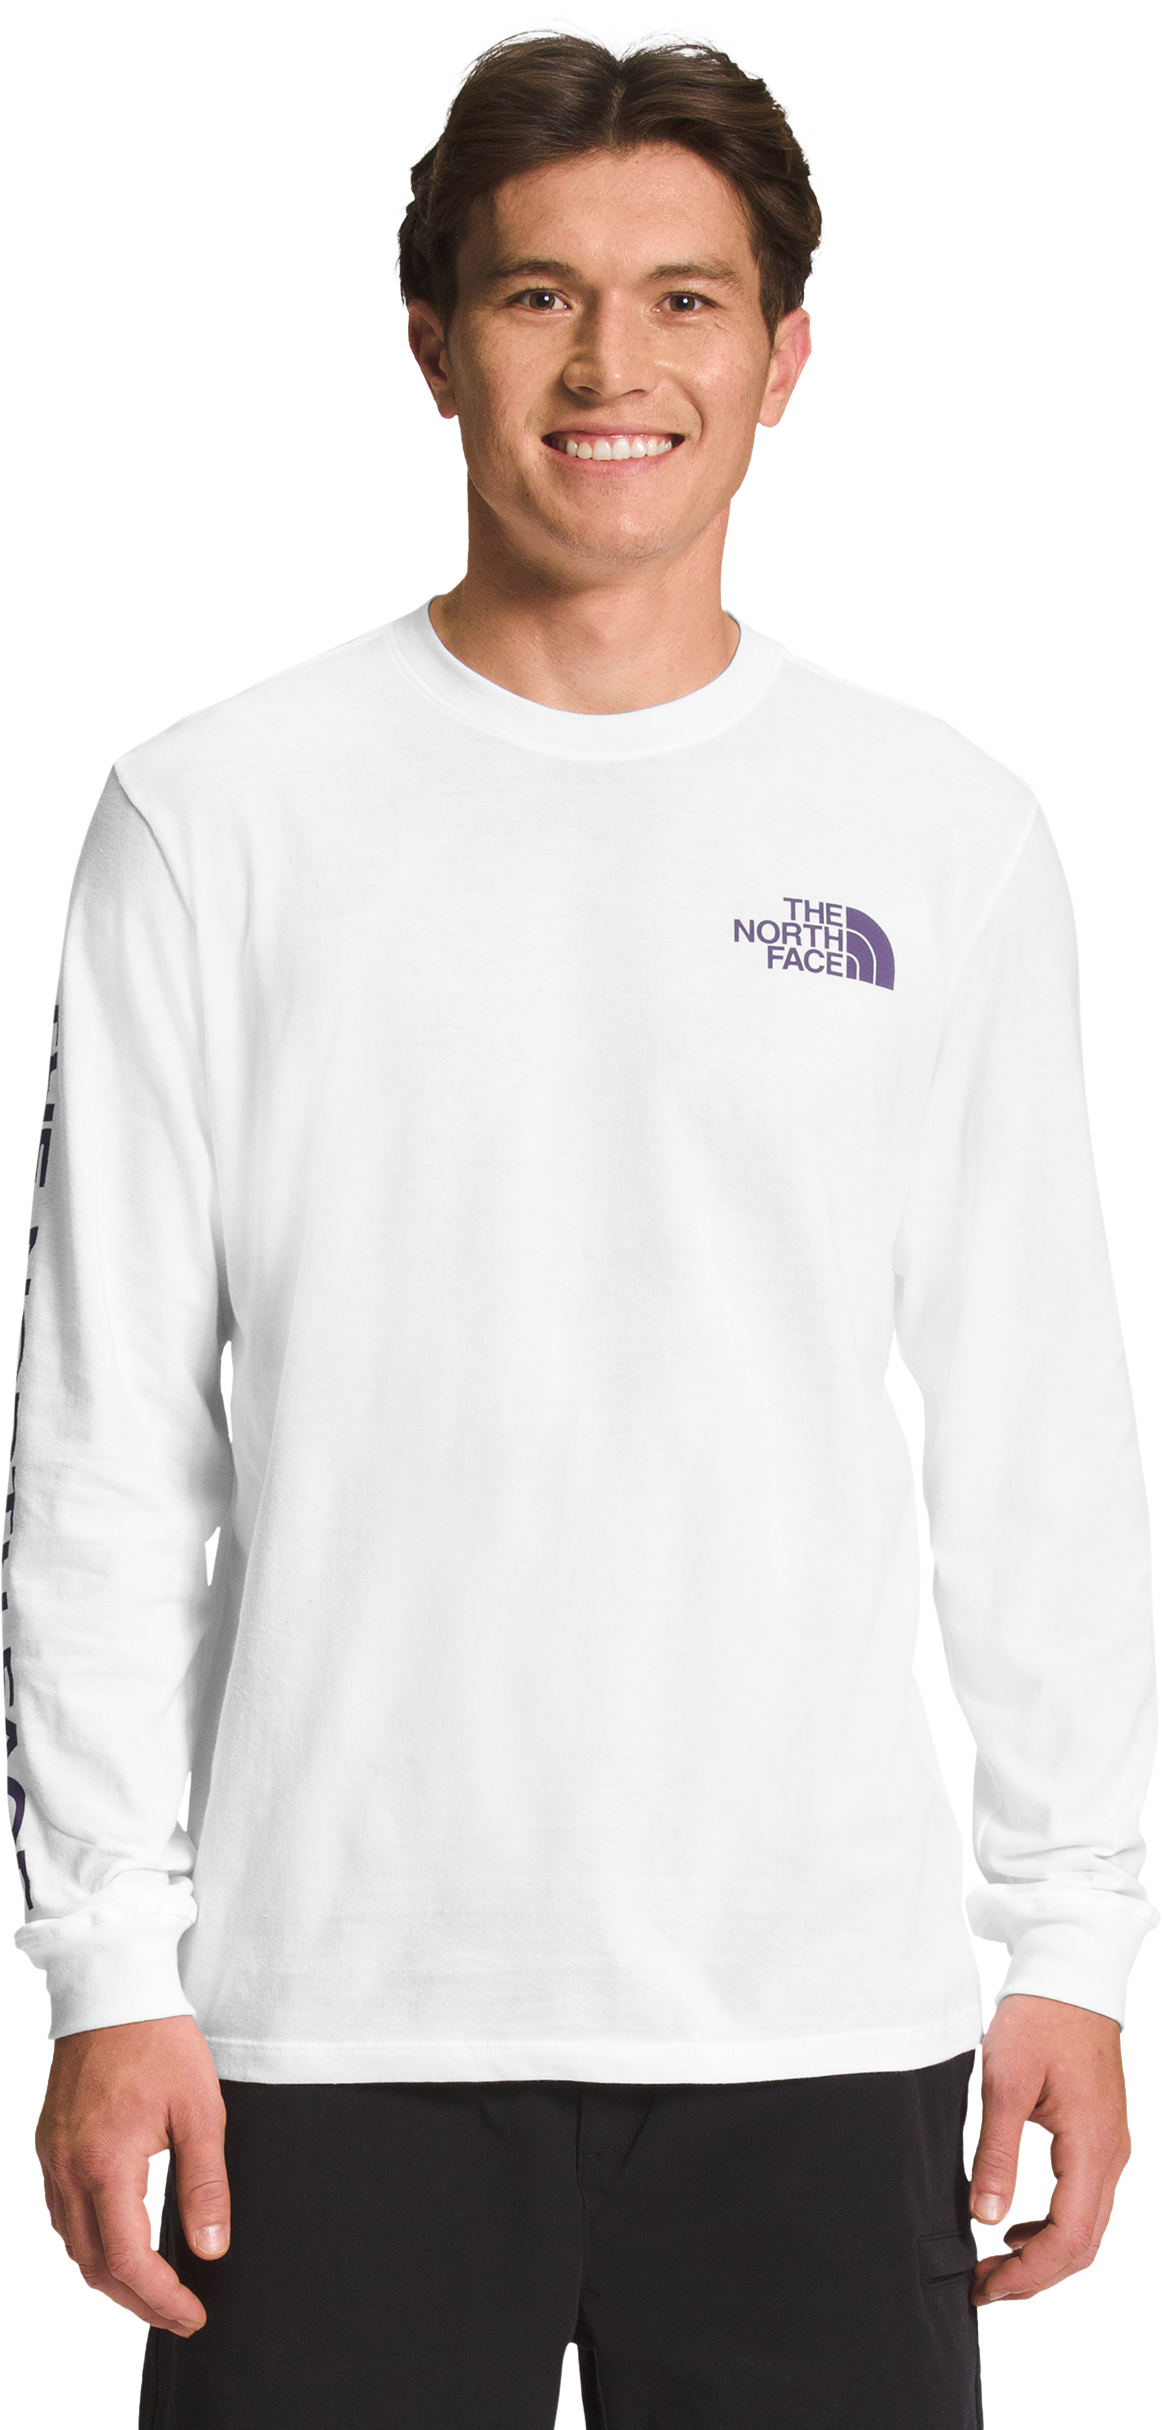 The North Face Hit Graphic Long-Sleeve T-Shirt for Men - TNF White/Lunar Slate - XL